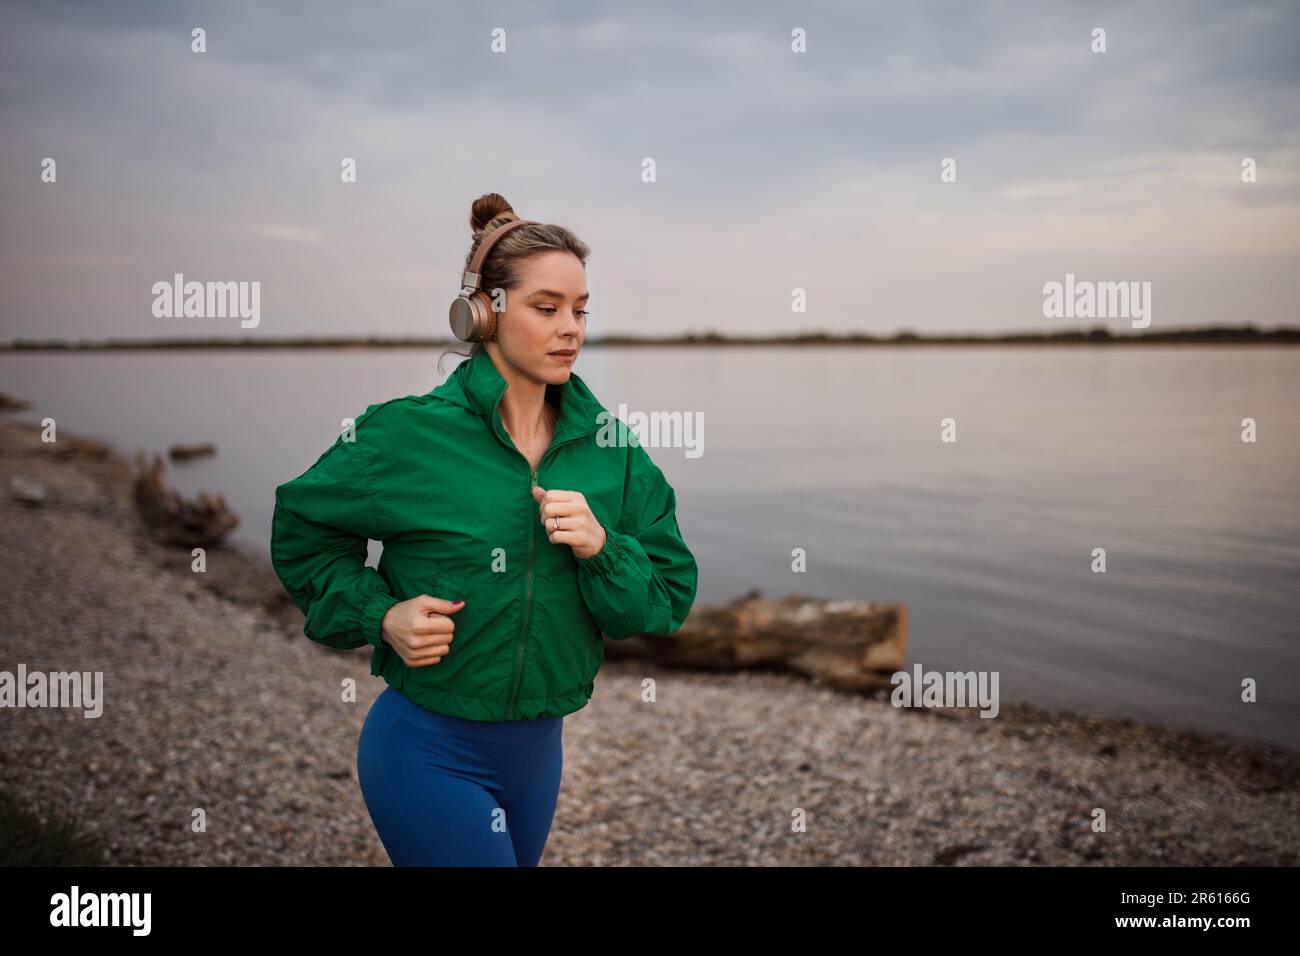 Young woman runing outdoor, near the lake. Stock Photo